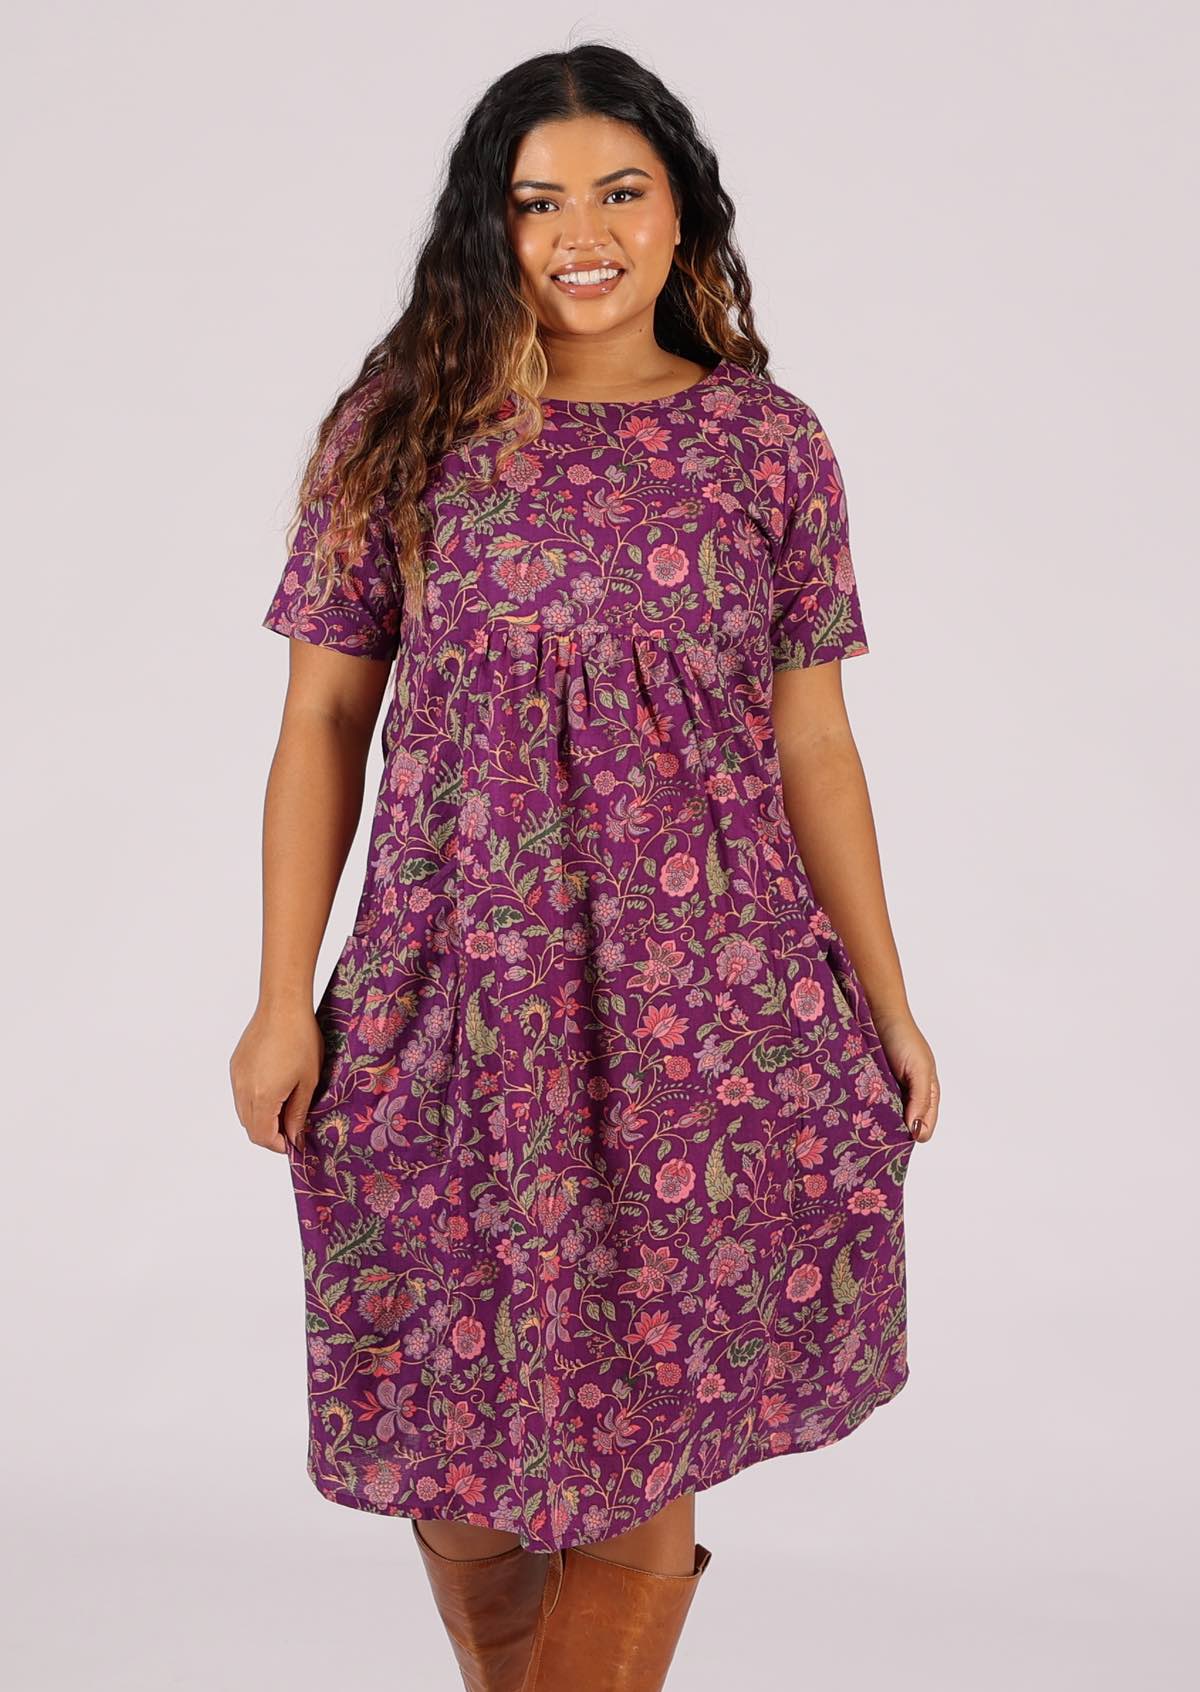 T-shirt sleeved cotton dress in sweet pink and purple floral print